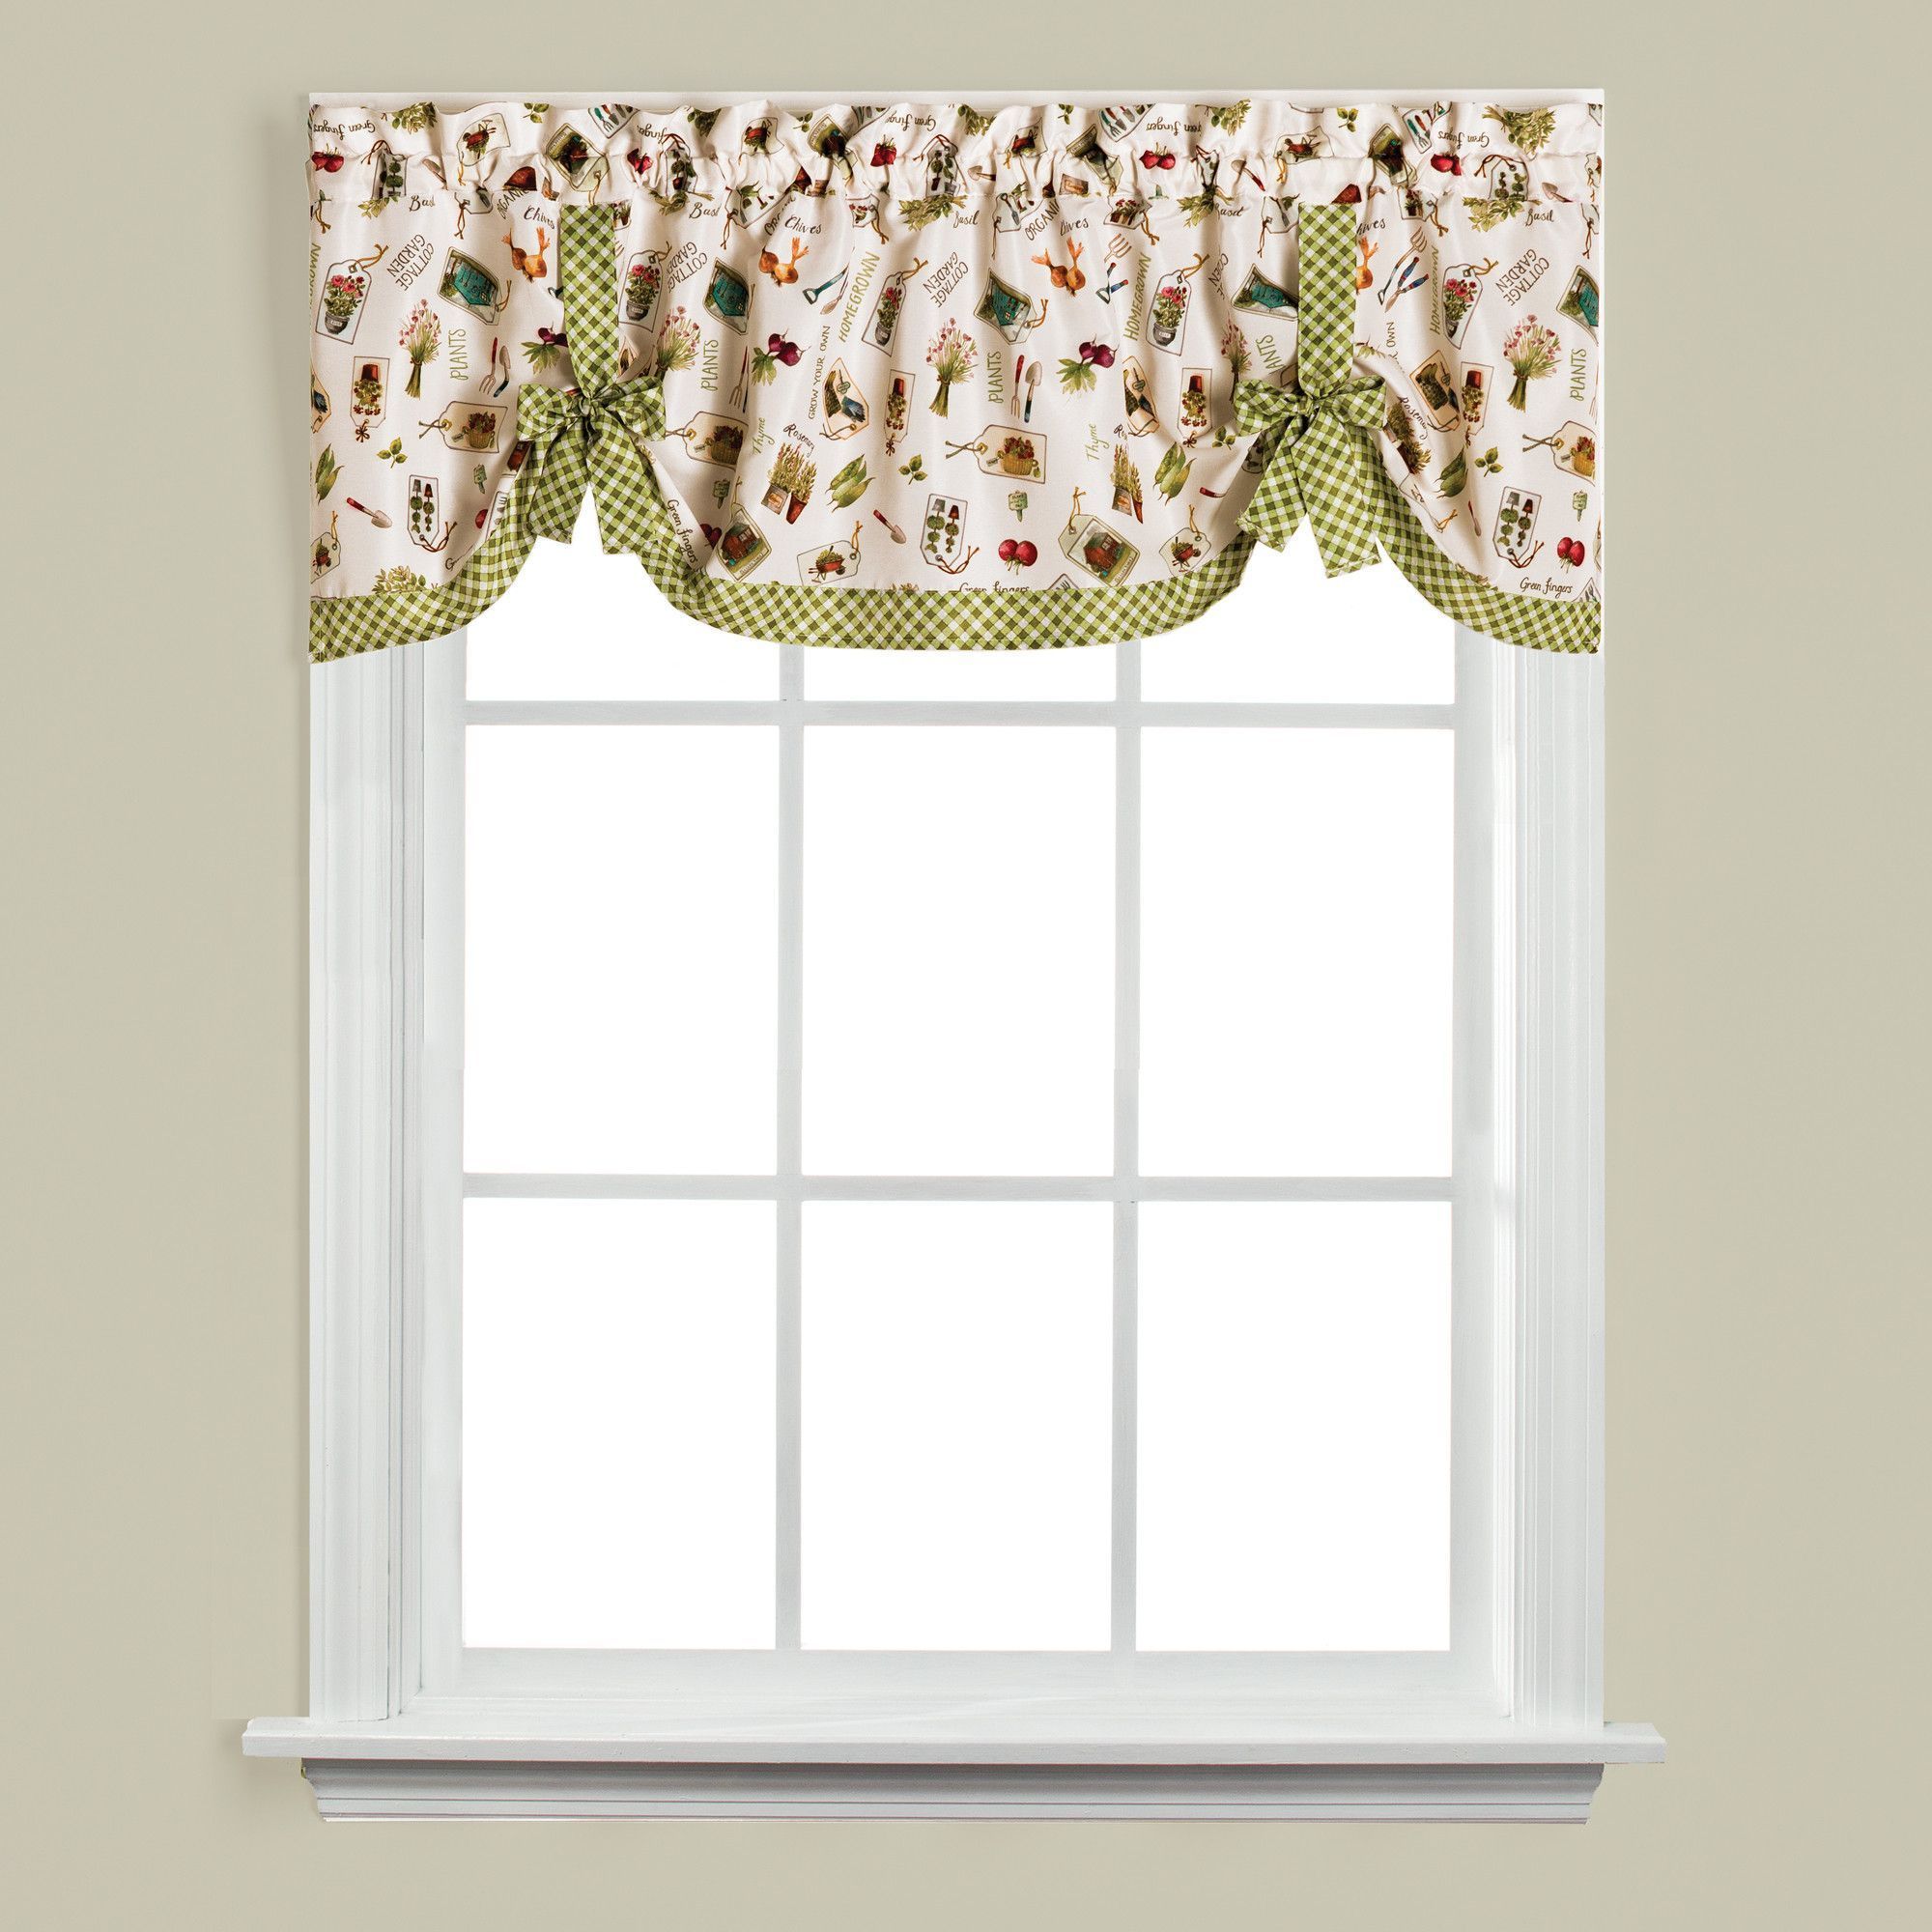 Homegrown Curtain Valance | Products | Valance Curtains For Tree Branch Valance And Tiers Sets (View 4 of 20)